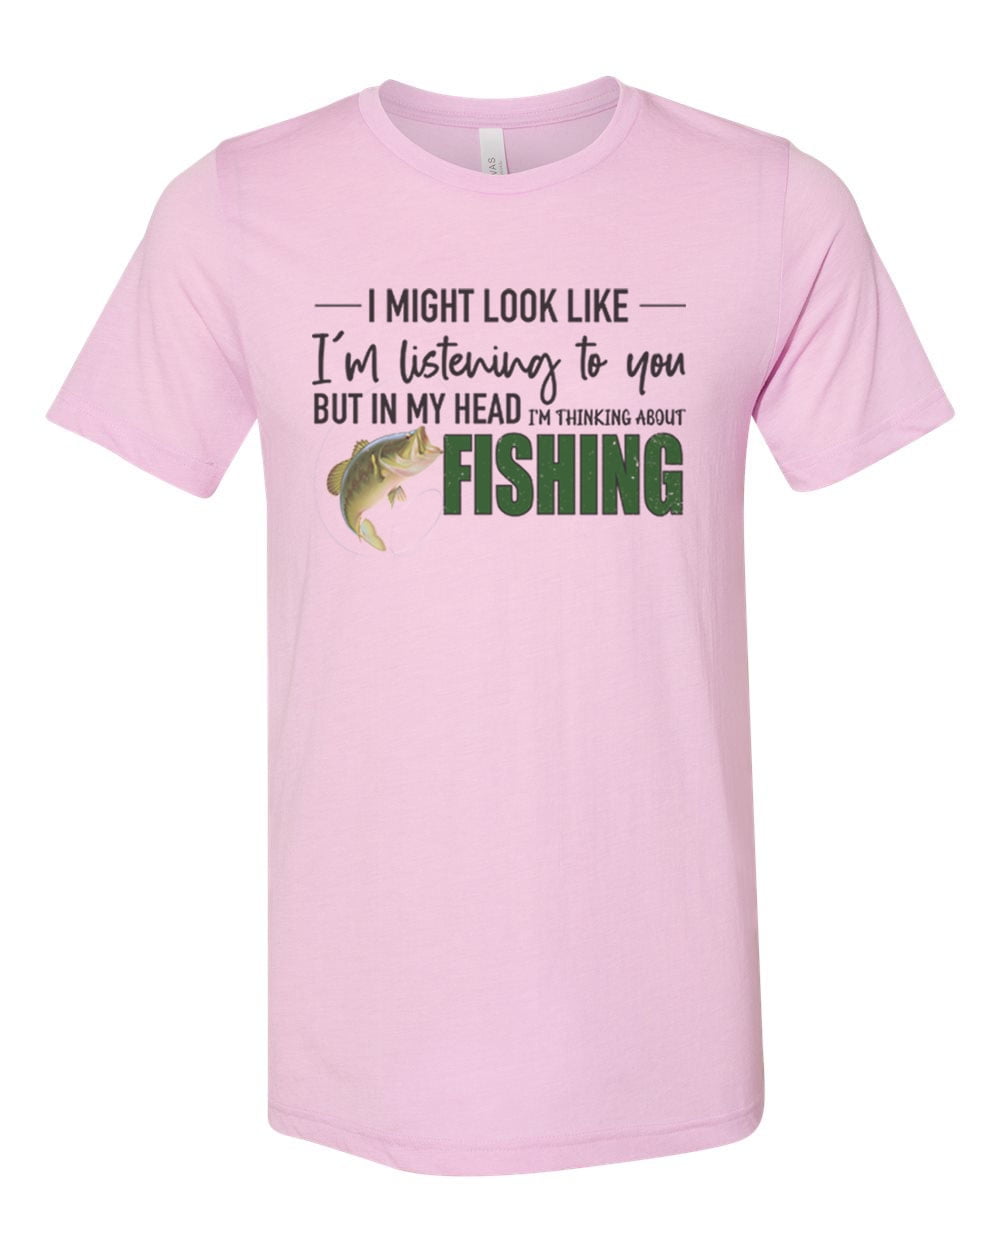 Fishing Shirt, Thinking About Fishing, Fishing Gift, Unisex Fit, Dad Gift,  Gift For Him, Fishing Tshirt, Fisherman Shirt, Fisherman Gift, Lilac, XL 